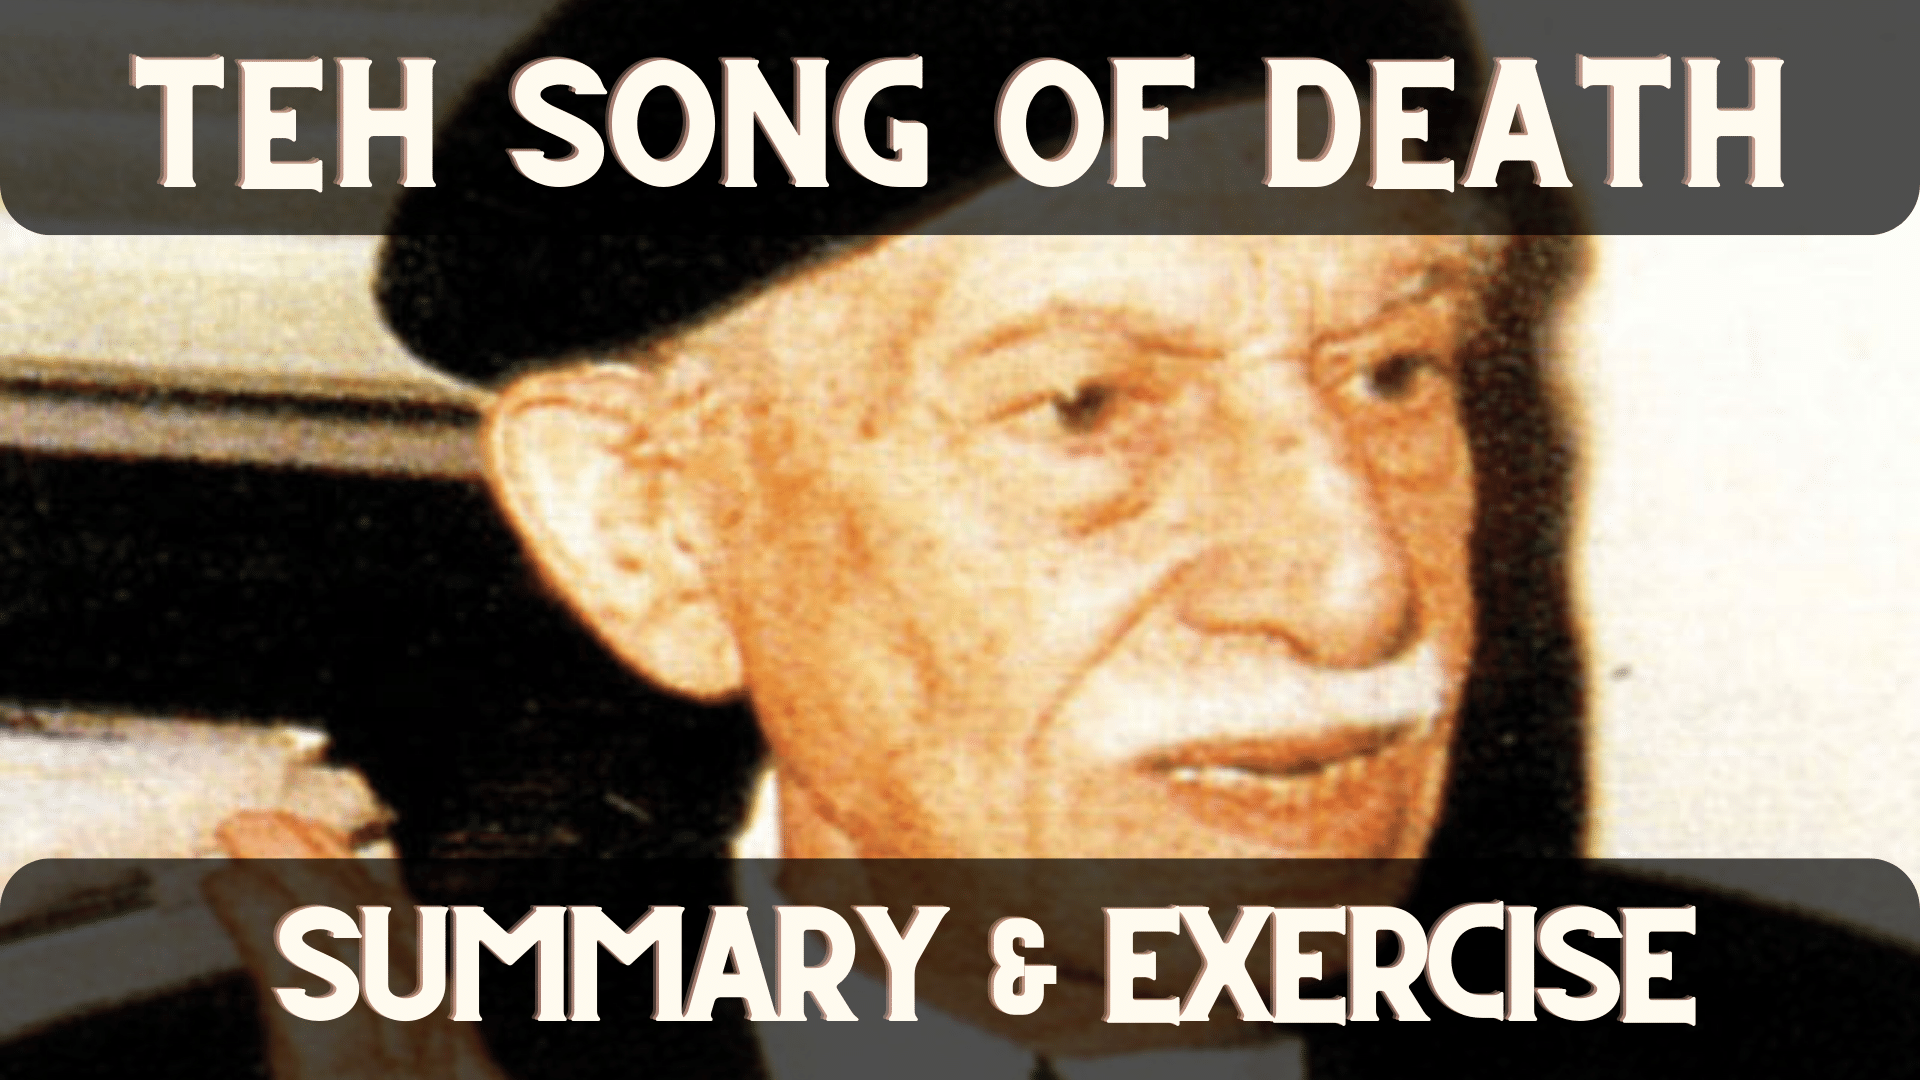 The Song of Death by Twafik Al-Hakim Summary & Exercise